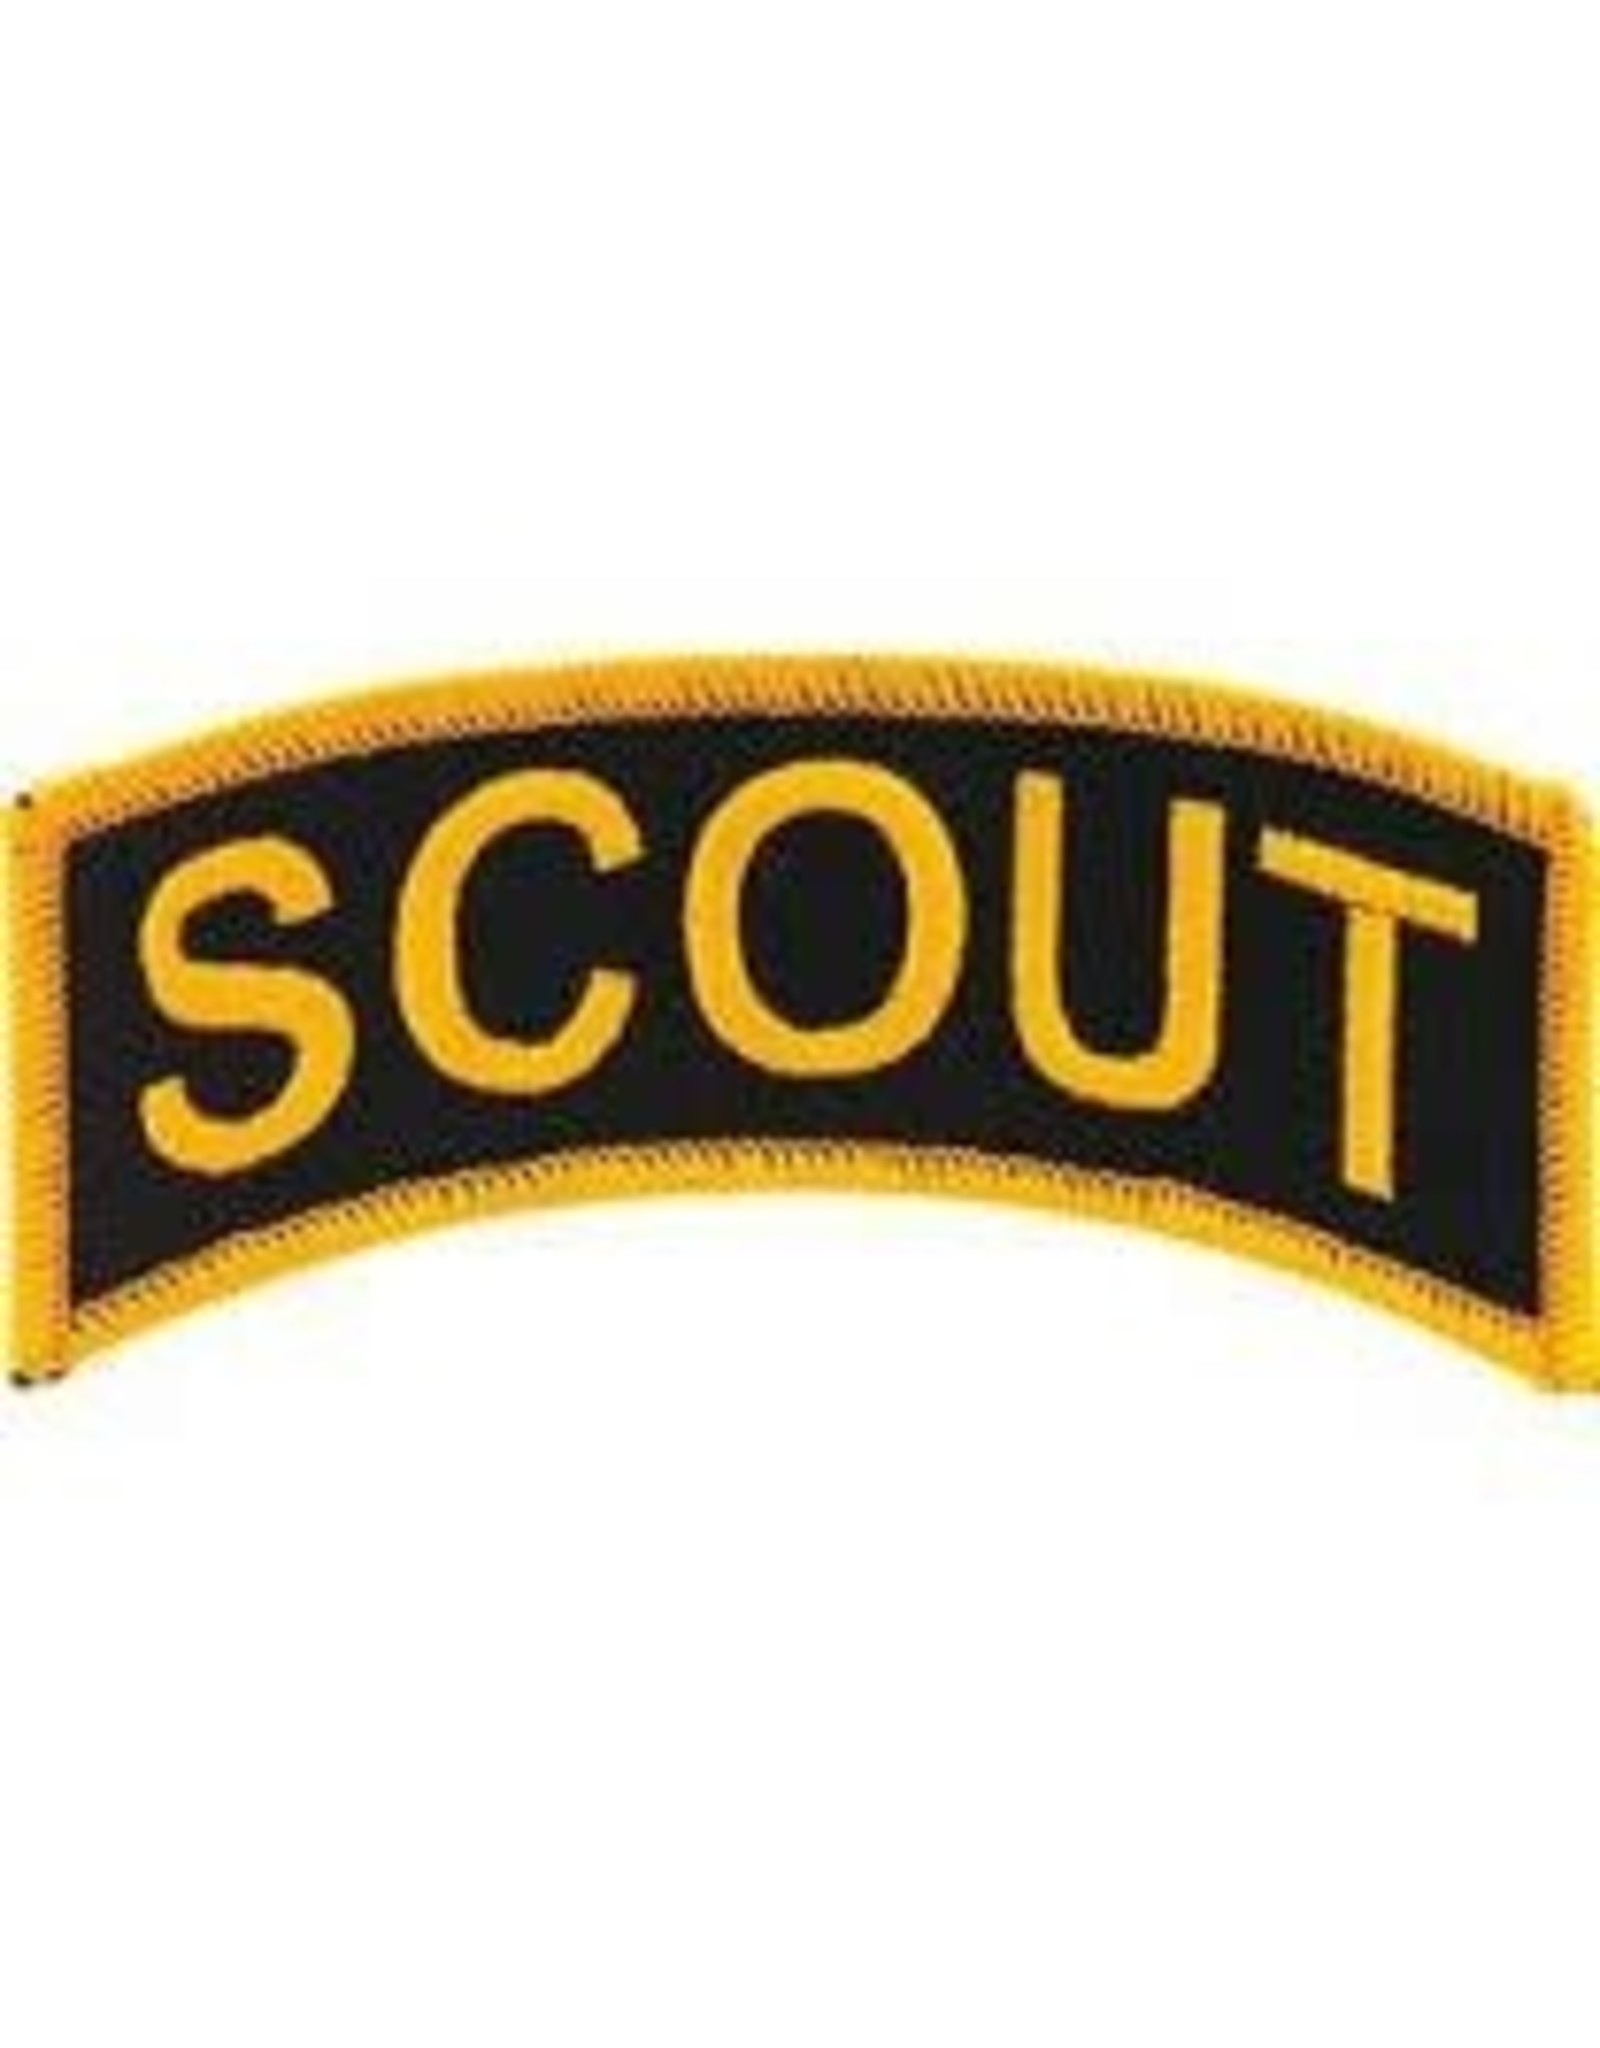 Patch - Army Tab Scout